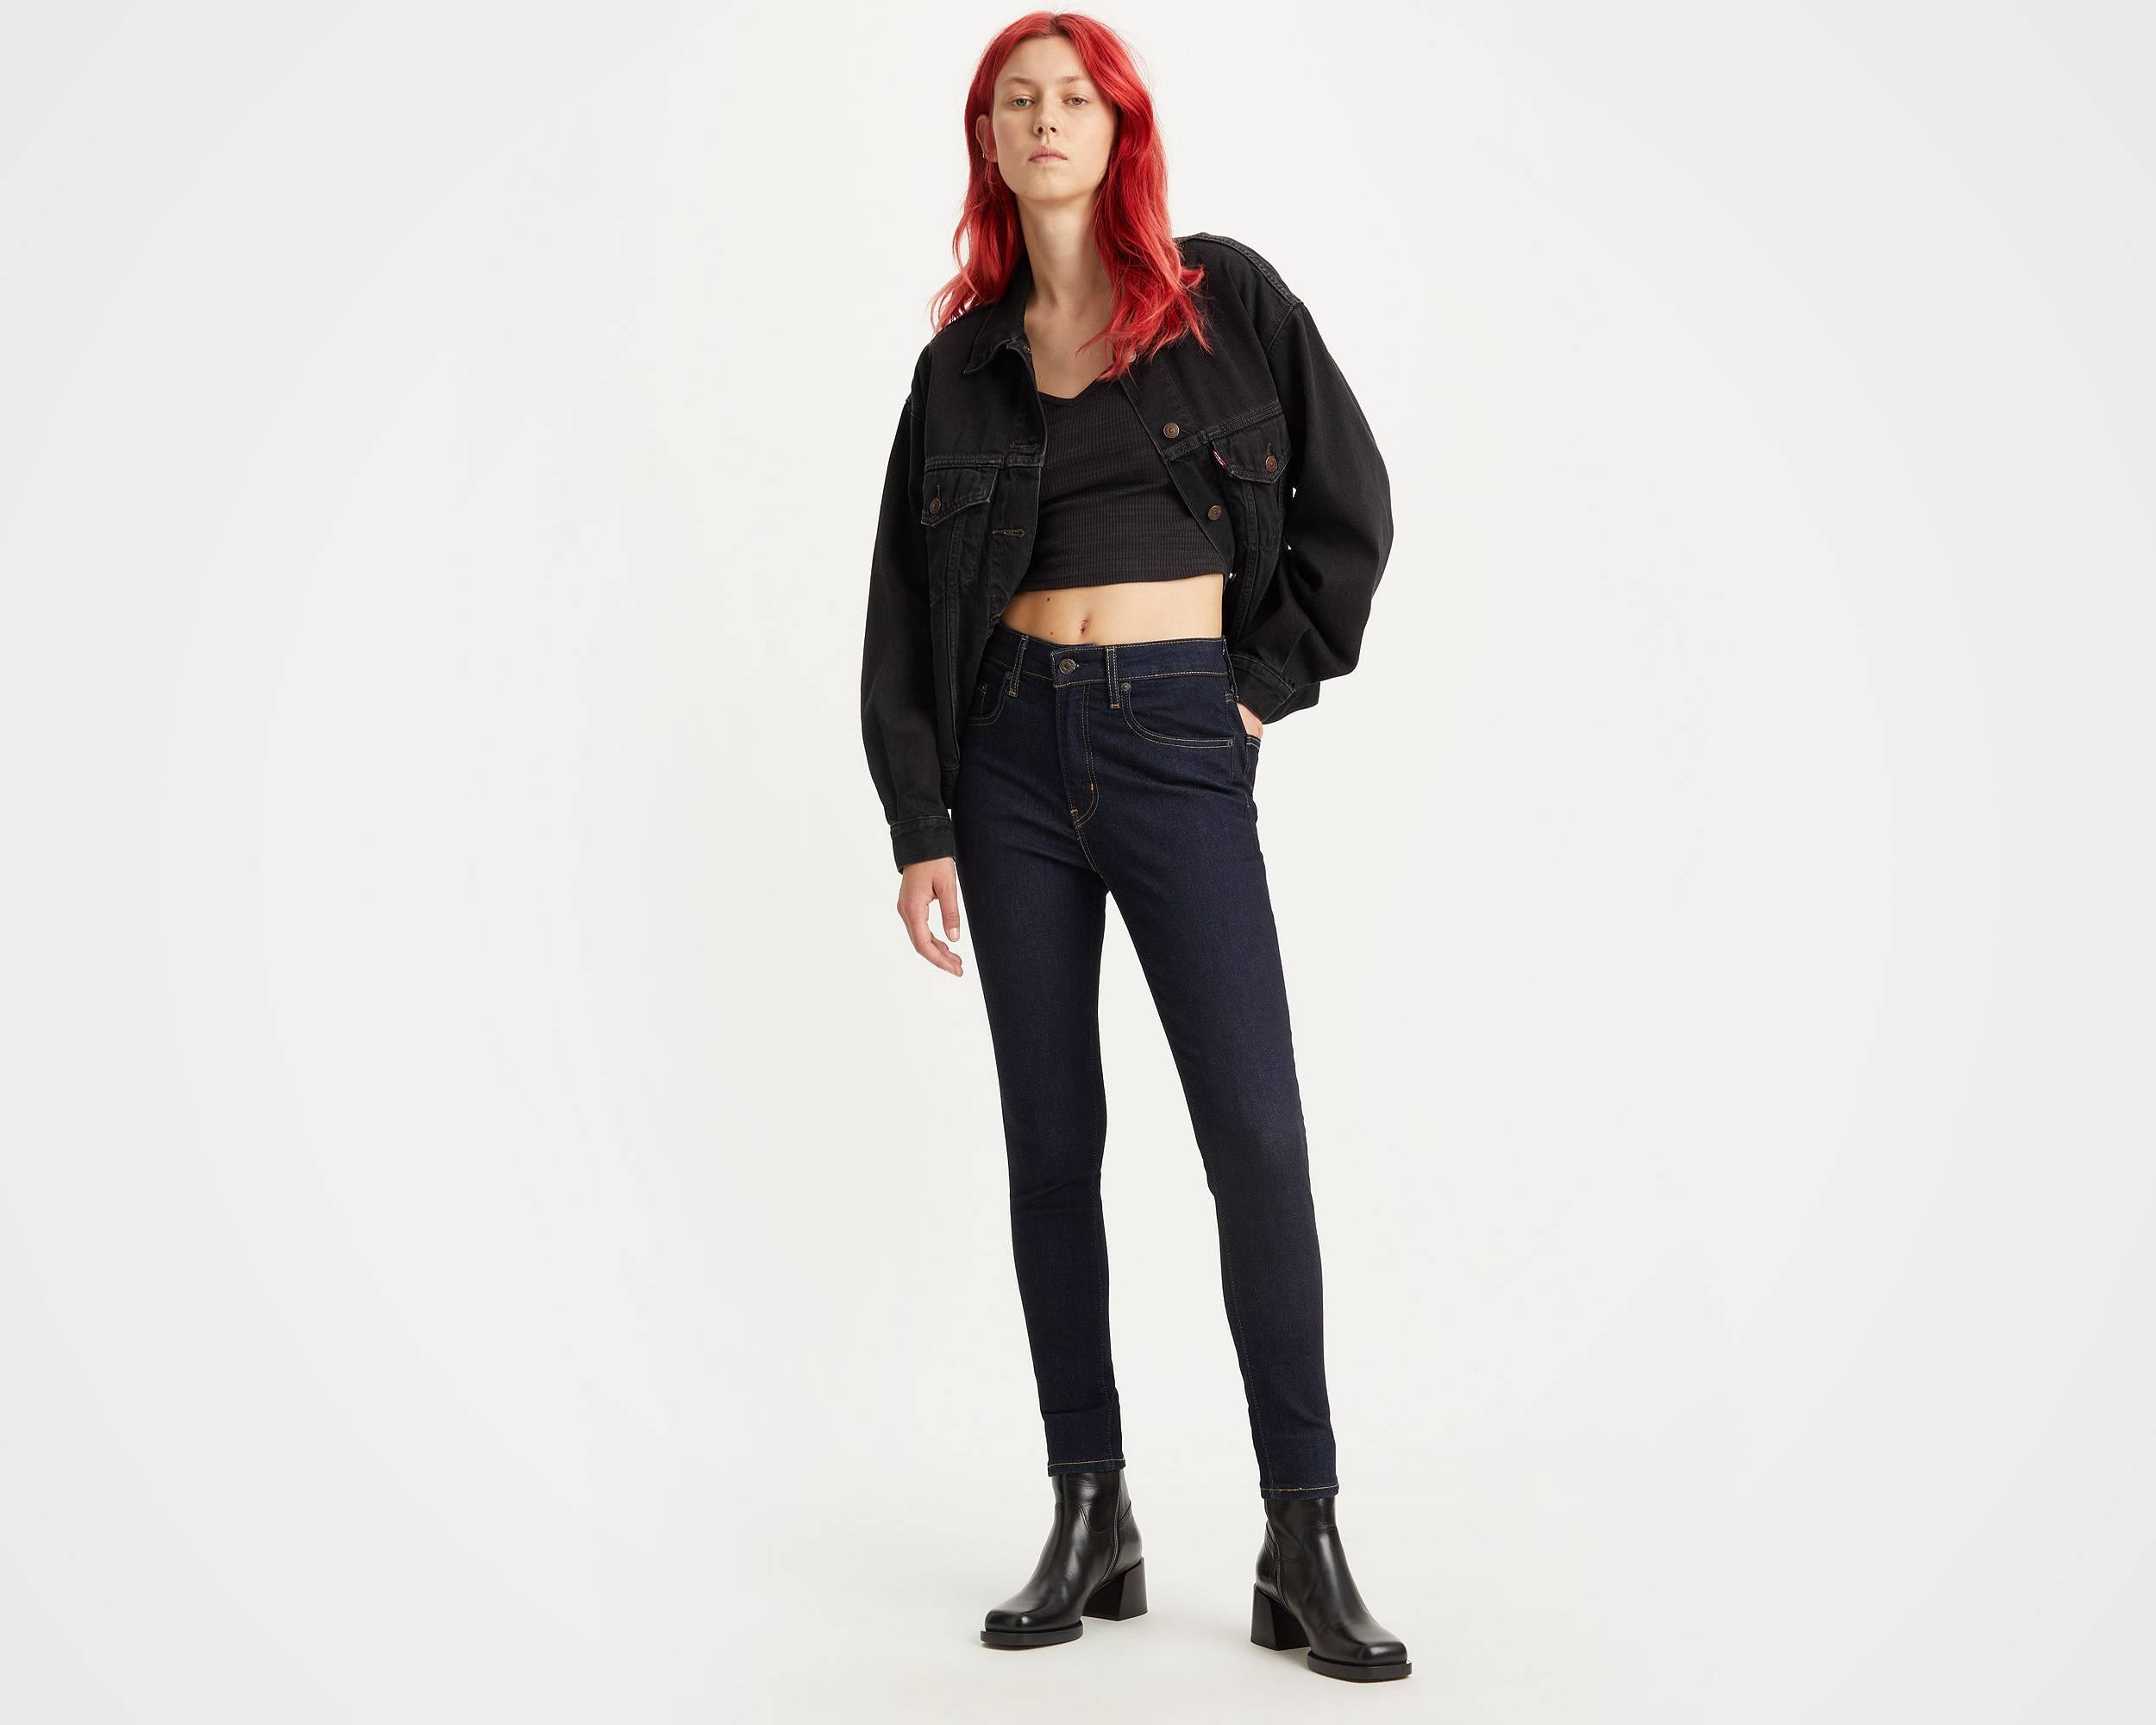 721™ High Rise Skinny Jeans - Levi's Jeans, Jackets & Clothing